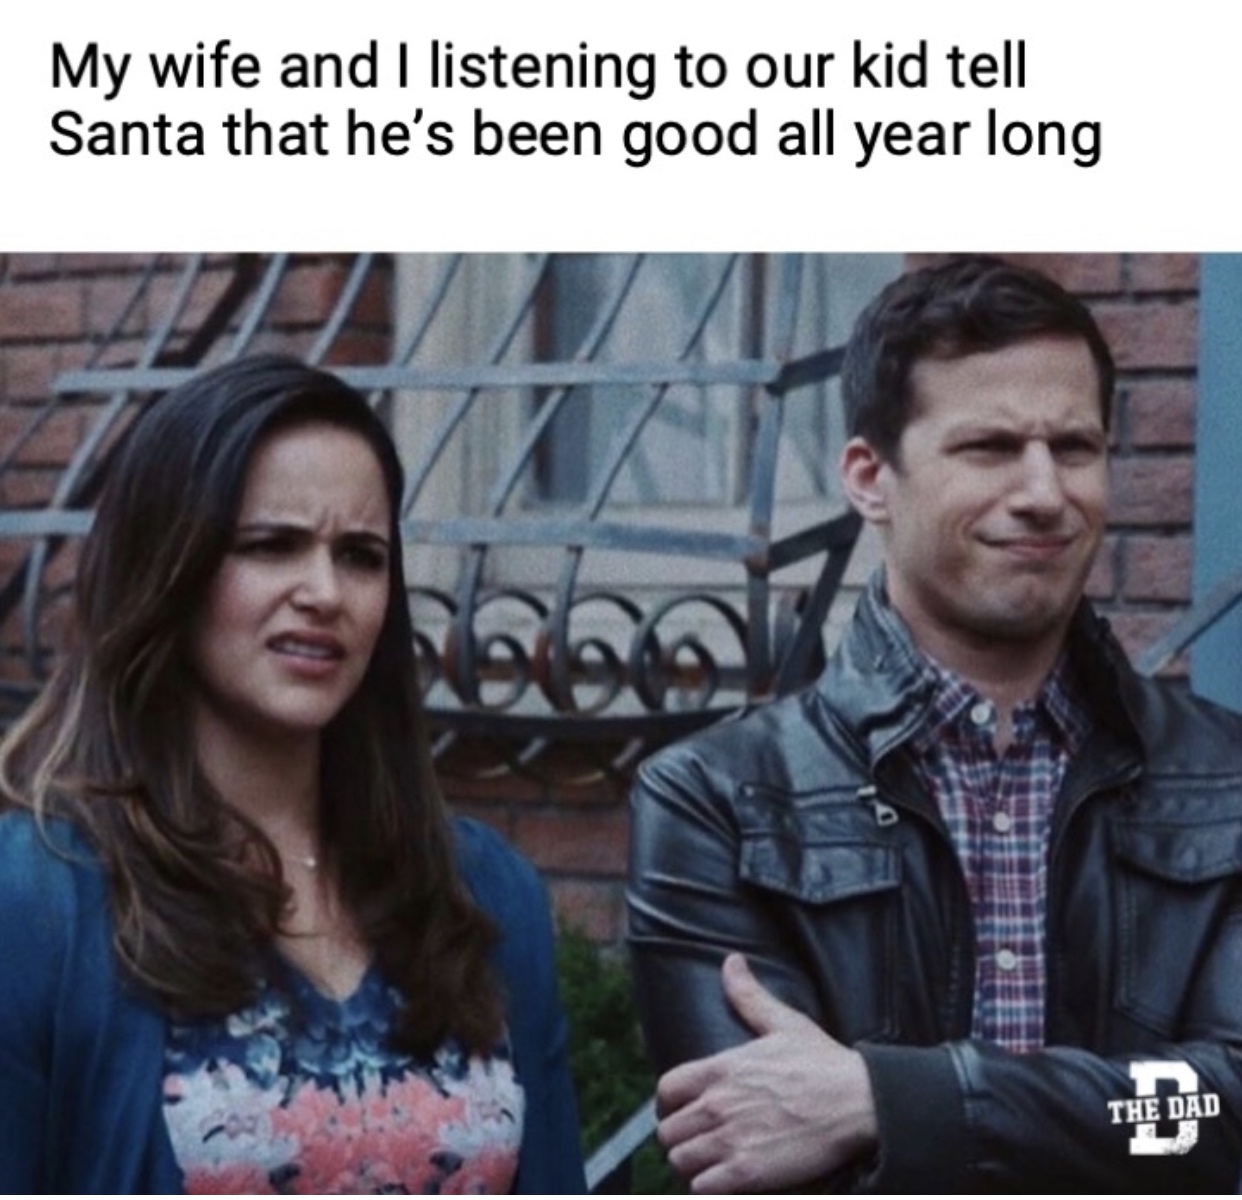 Brooklyn Nine-Nine - My wife and I listening to our kid tell Santa that he's been good all year long The Dad